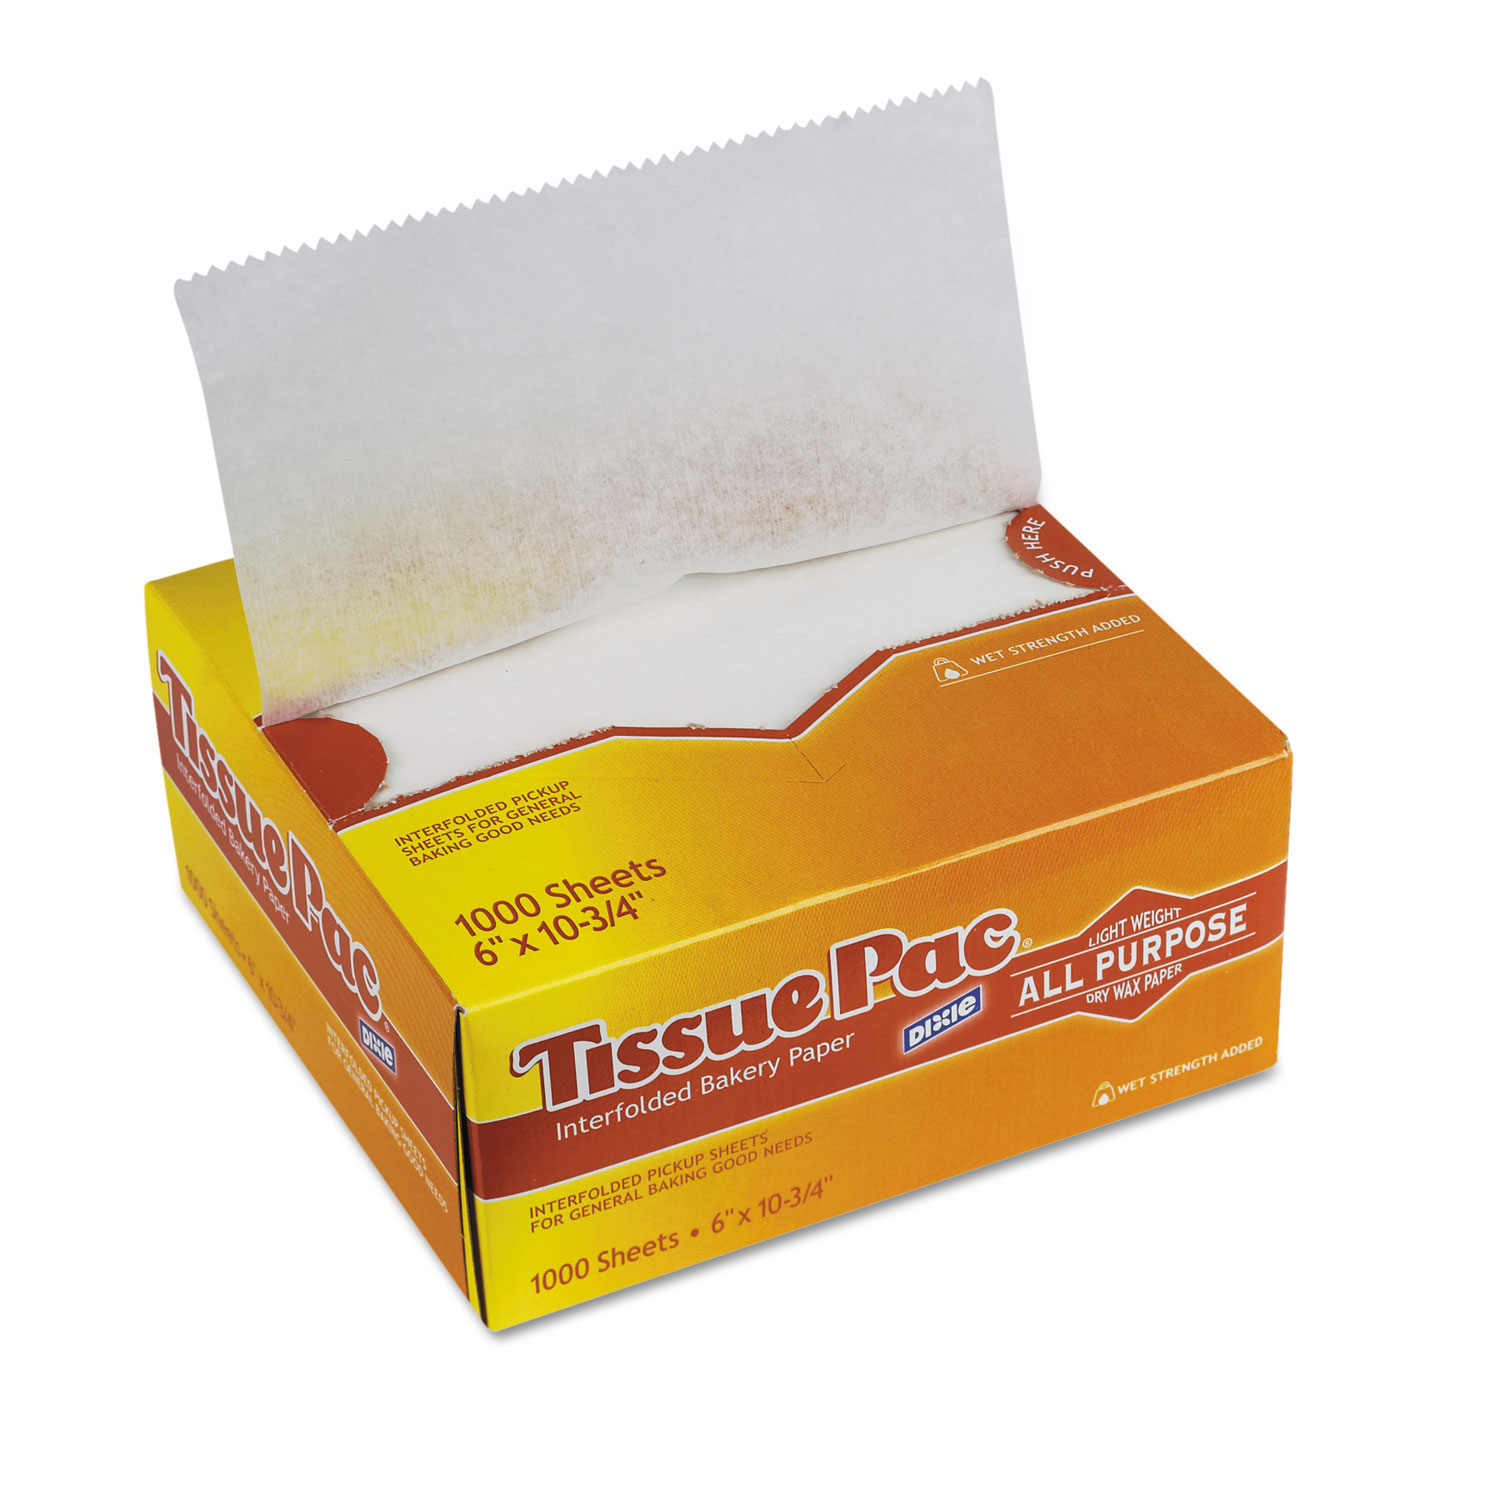  Dixie DIX T6 Tissue-Pac Lightweight Dry Waxed Interfolding Tissue, 6x10 3/4, White, 1000/Pack (DXET6) 